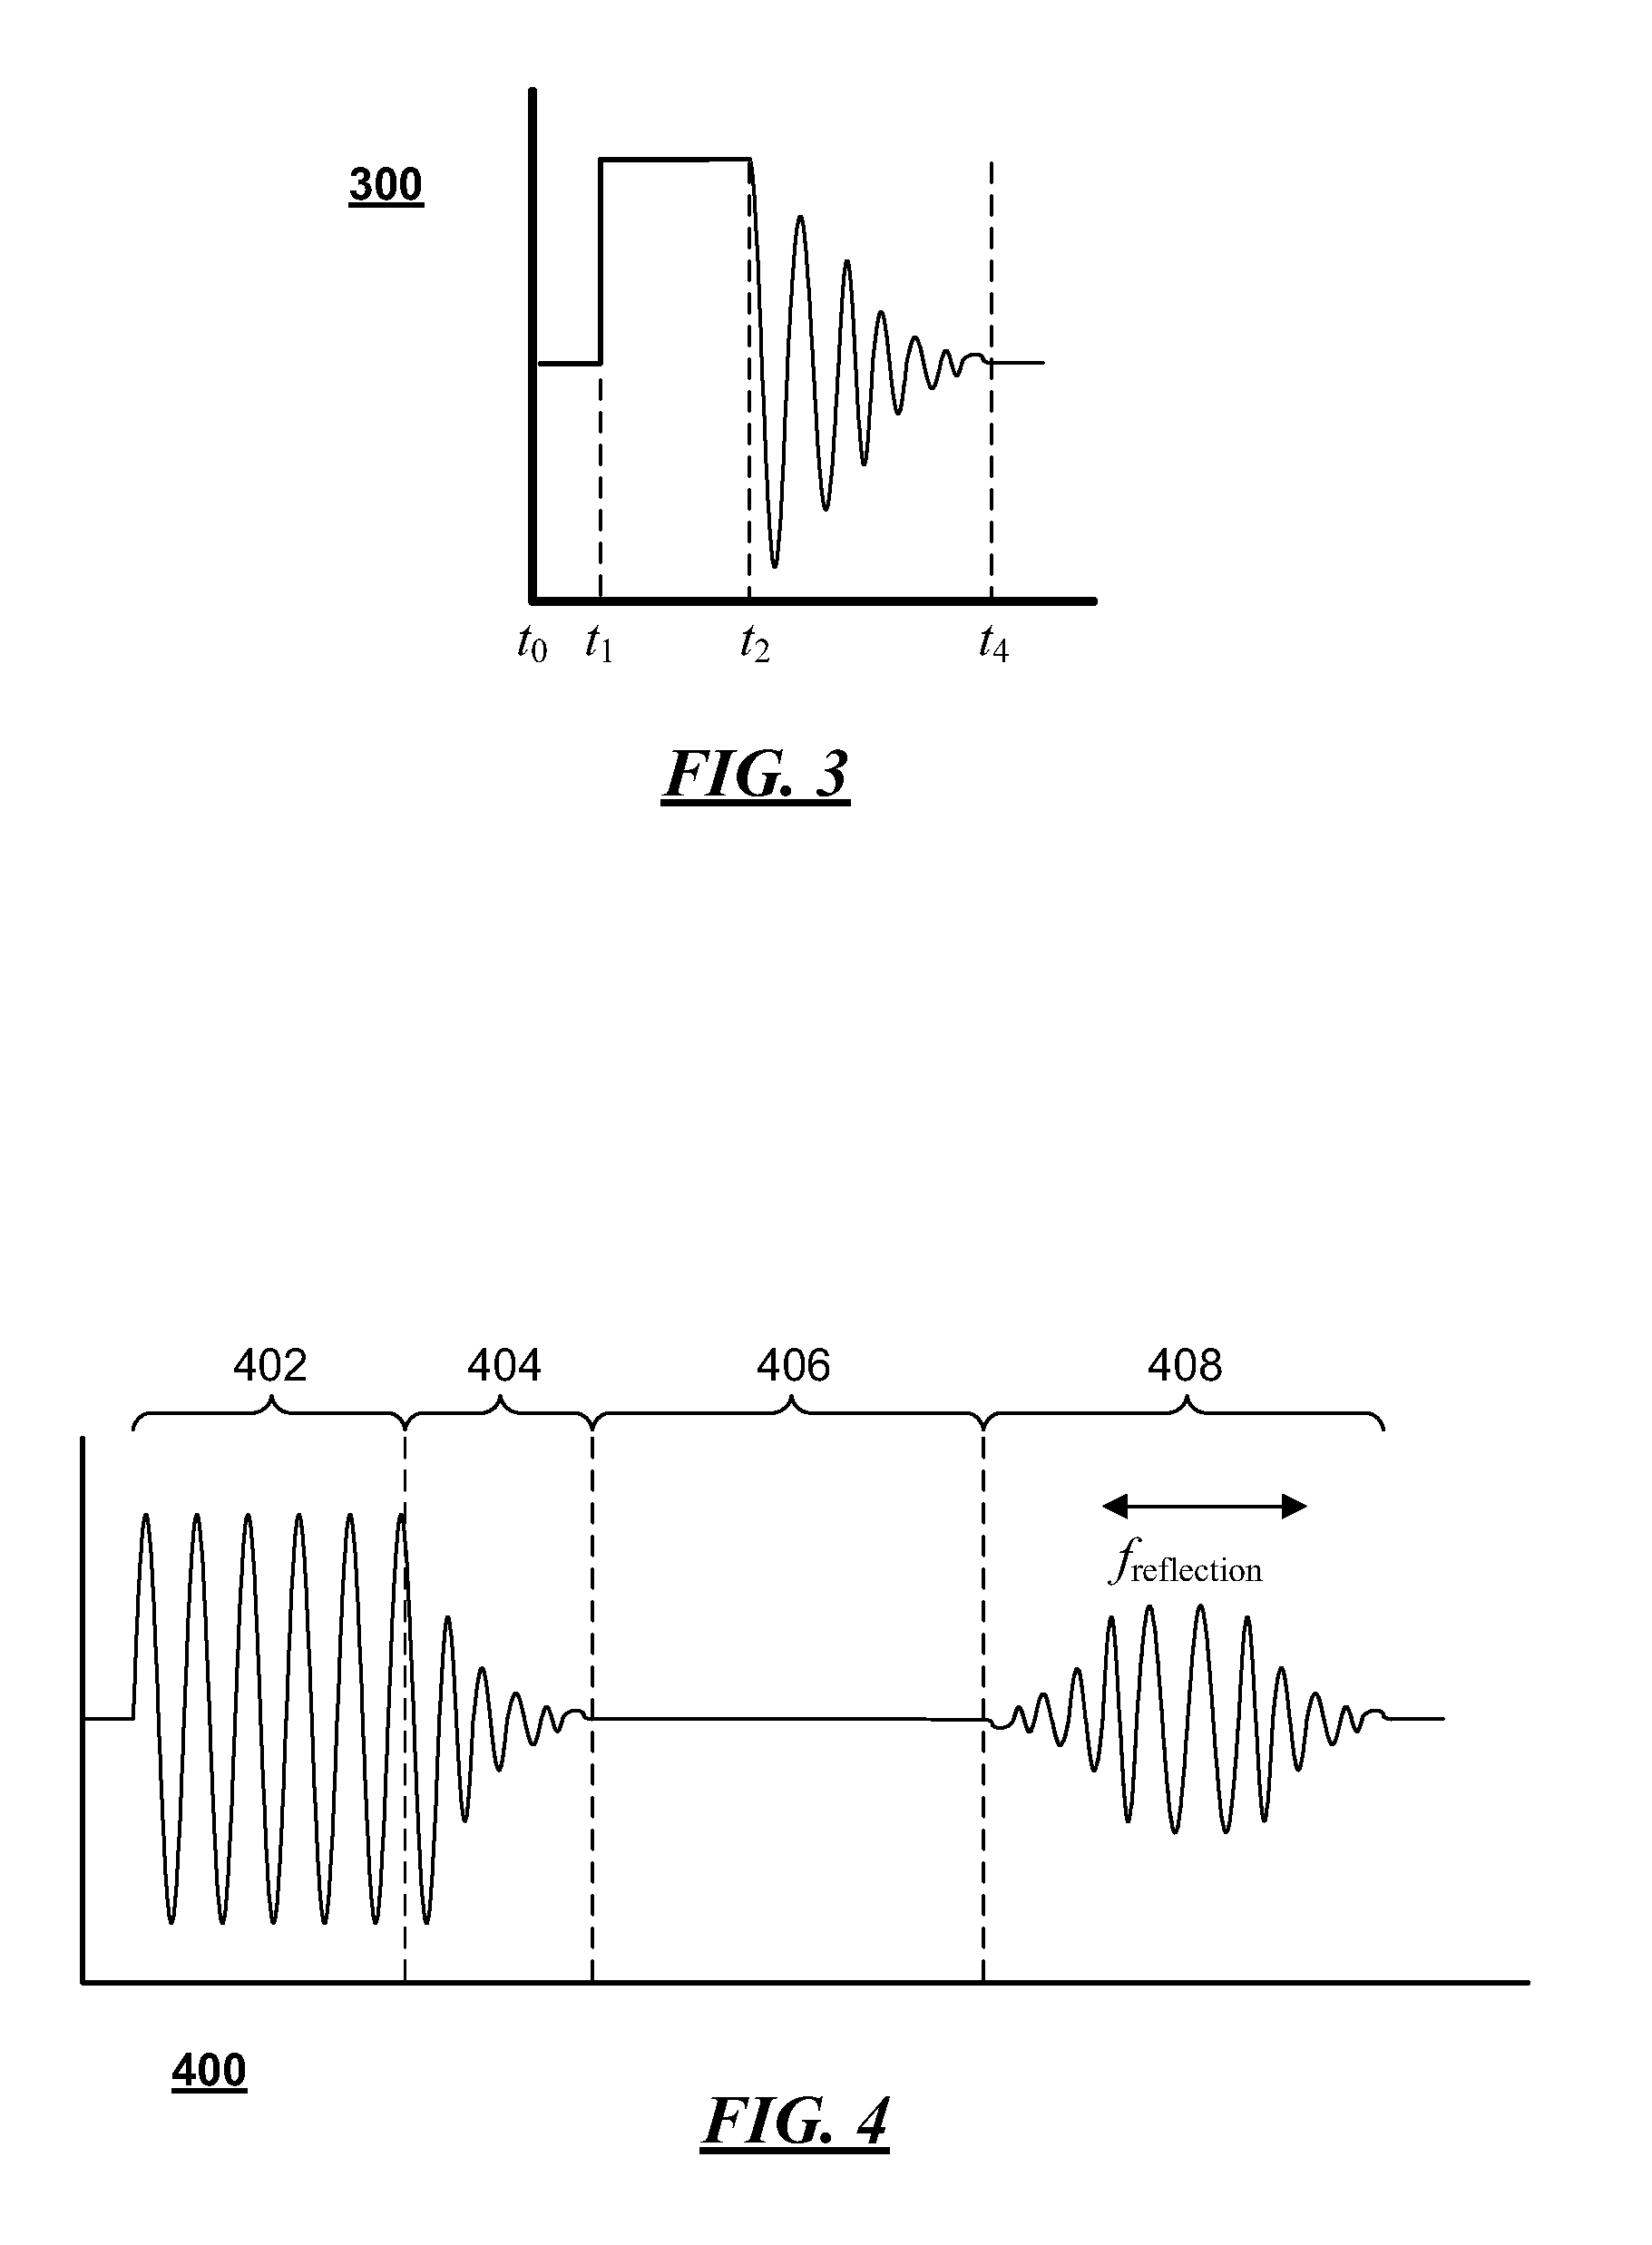 Self-tuning acoustic measurement system